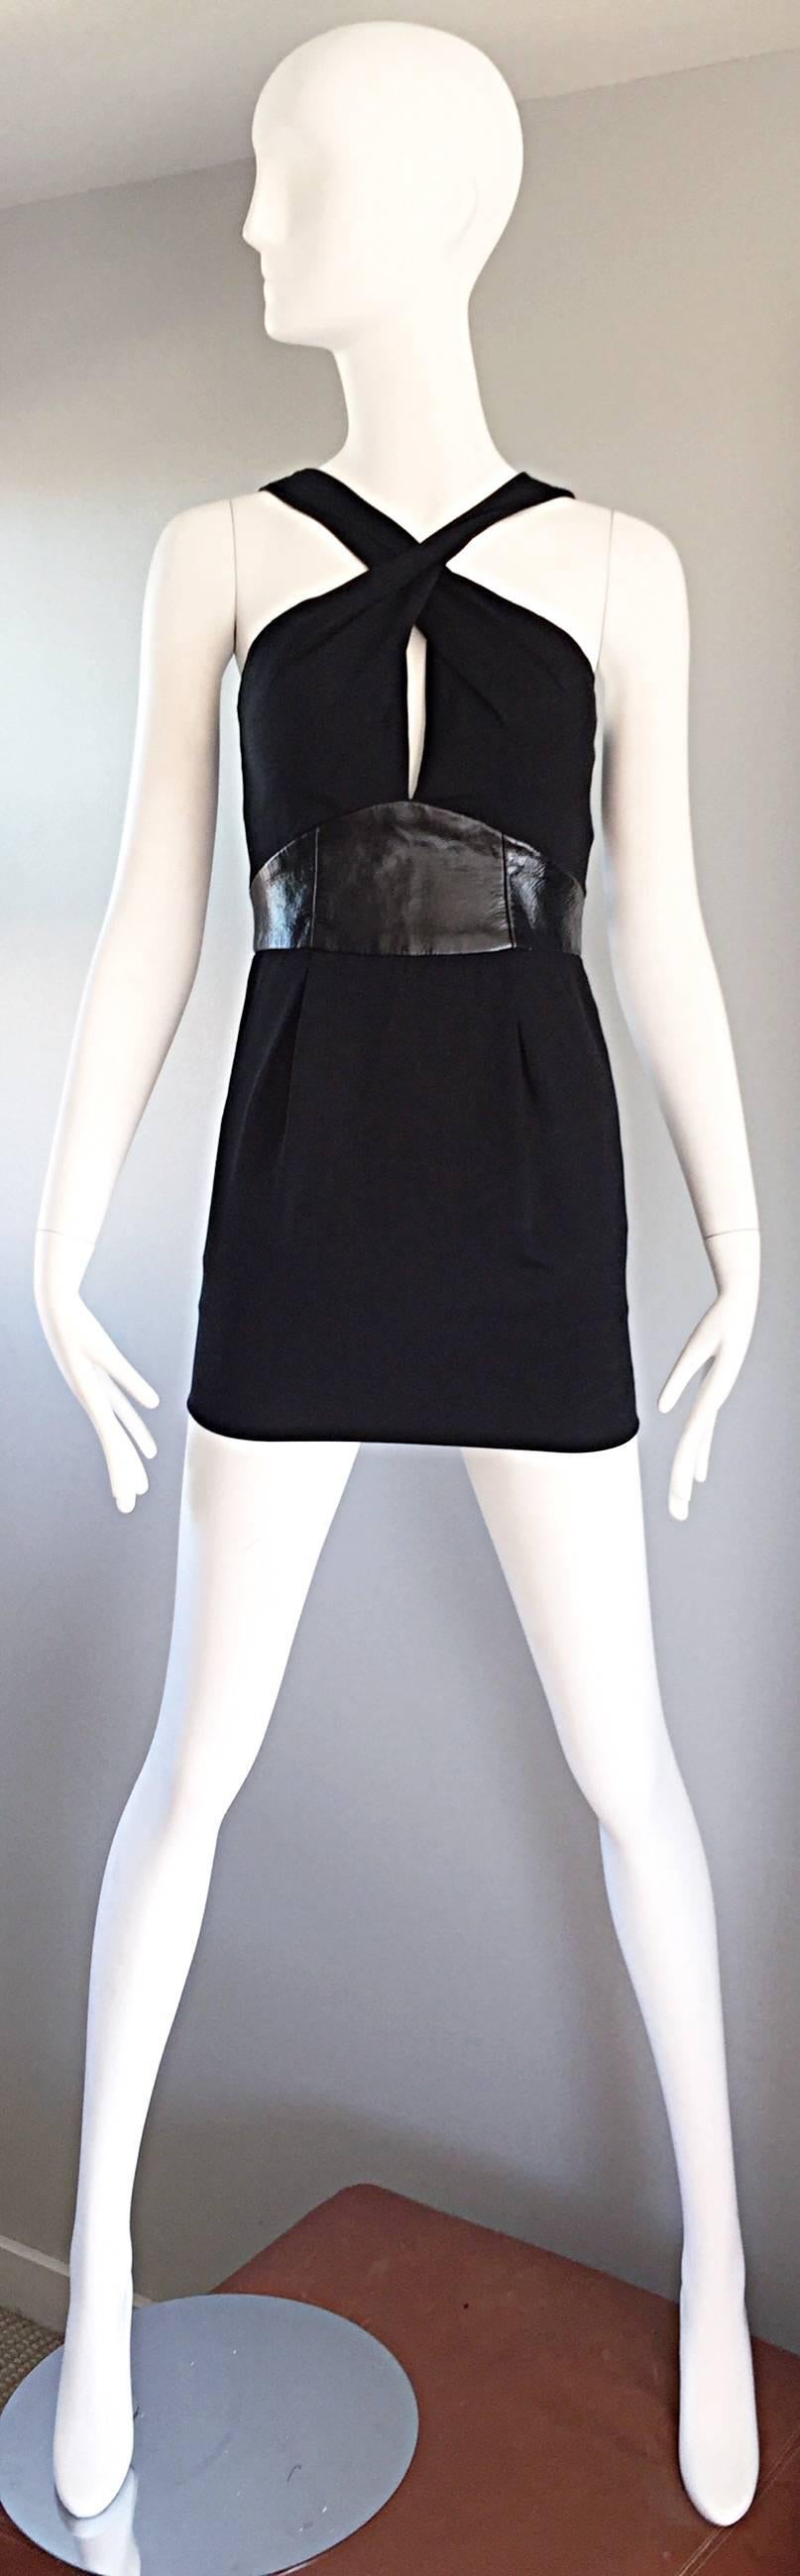 Sexy brand new with tags early 2000s BADGLEY MISCHKA black jersey and leather mini dress! Features a leather waistband, with a cut-out at center bust that reveals just the right amount of skin! Figure flattering, with some stretch that hugs the body